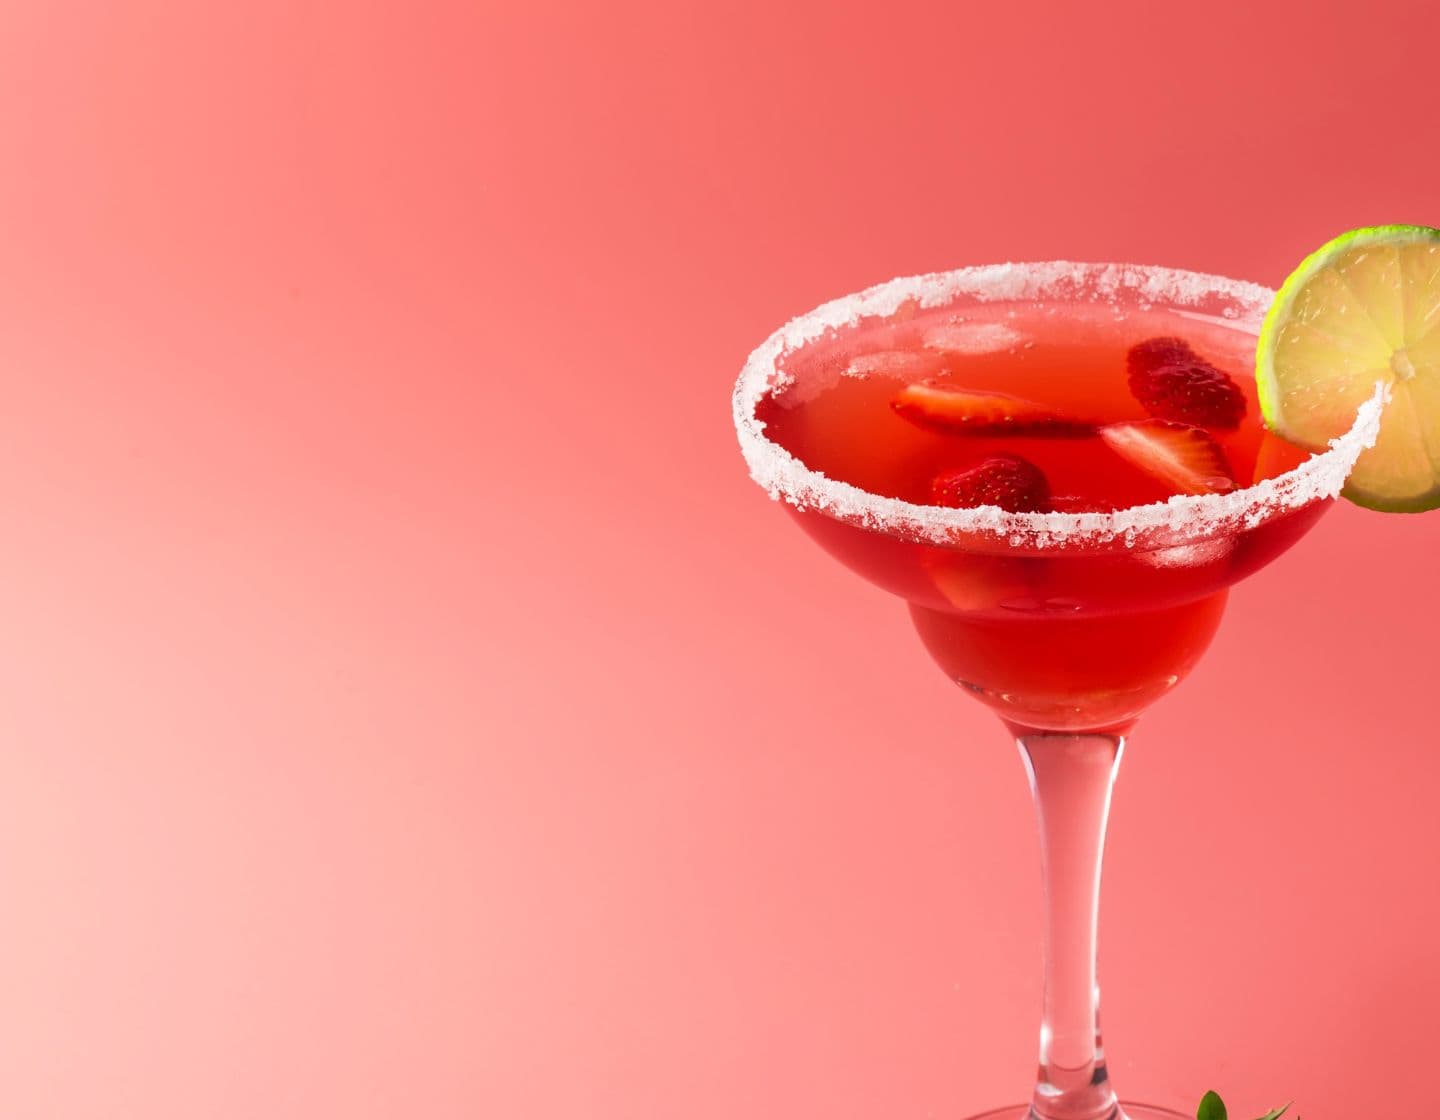 Red colored Margarita cocktail with salt on the rim of a margarita glass and a lime wheel garnish. 